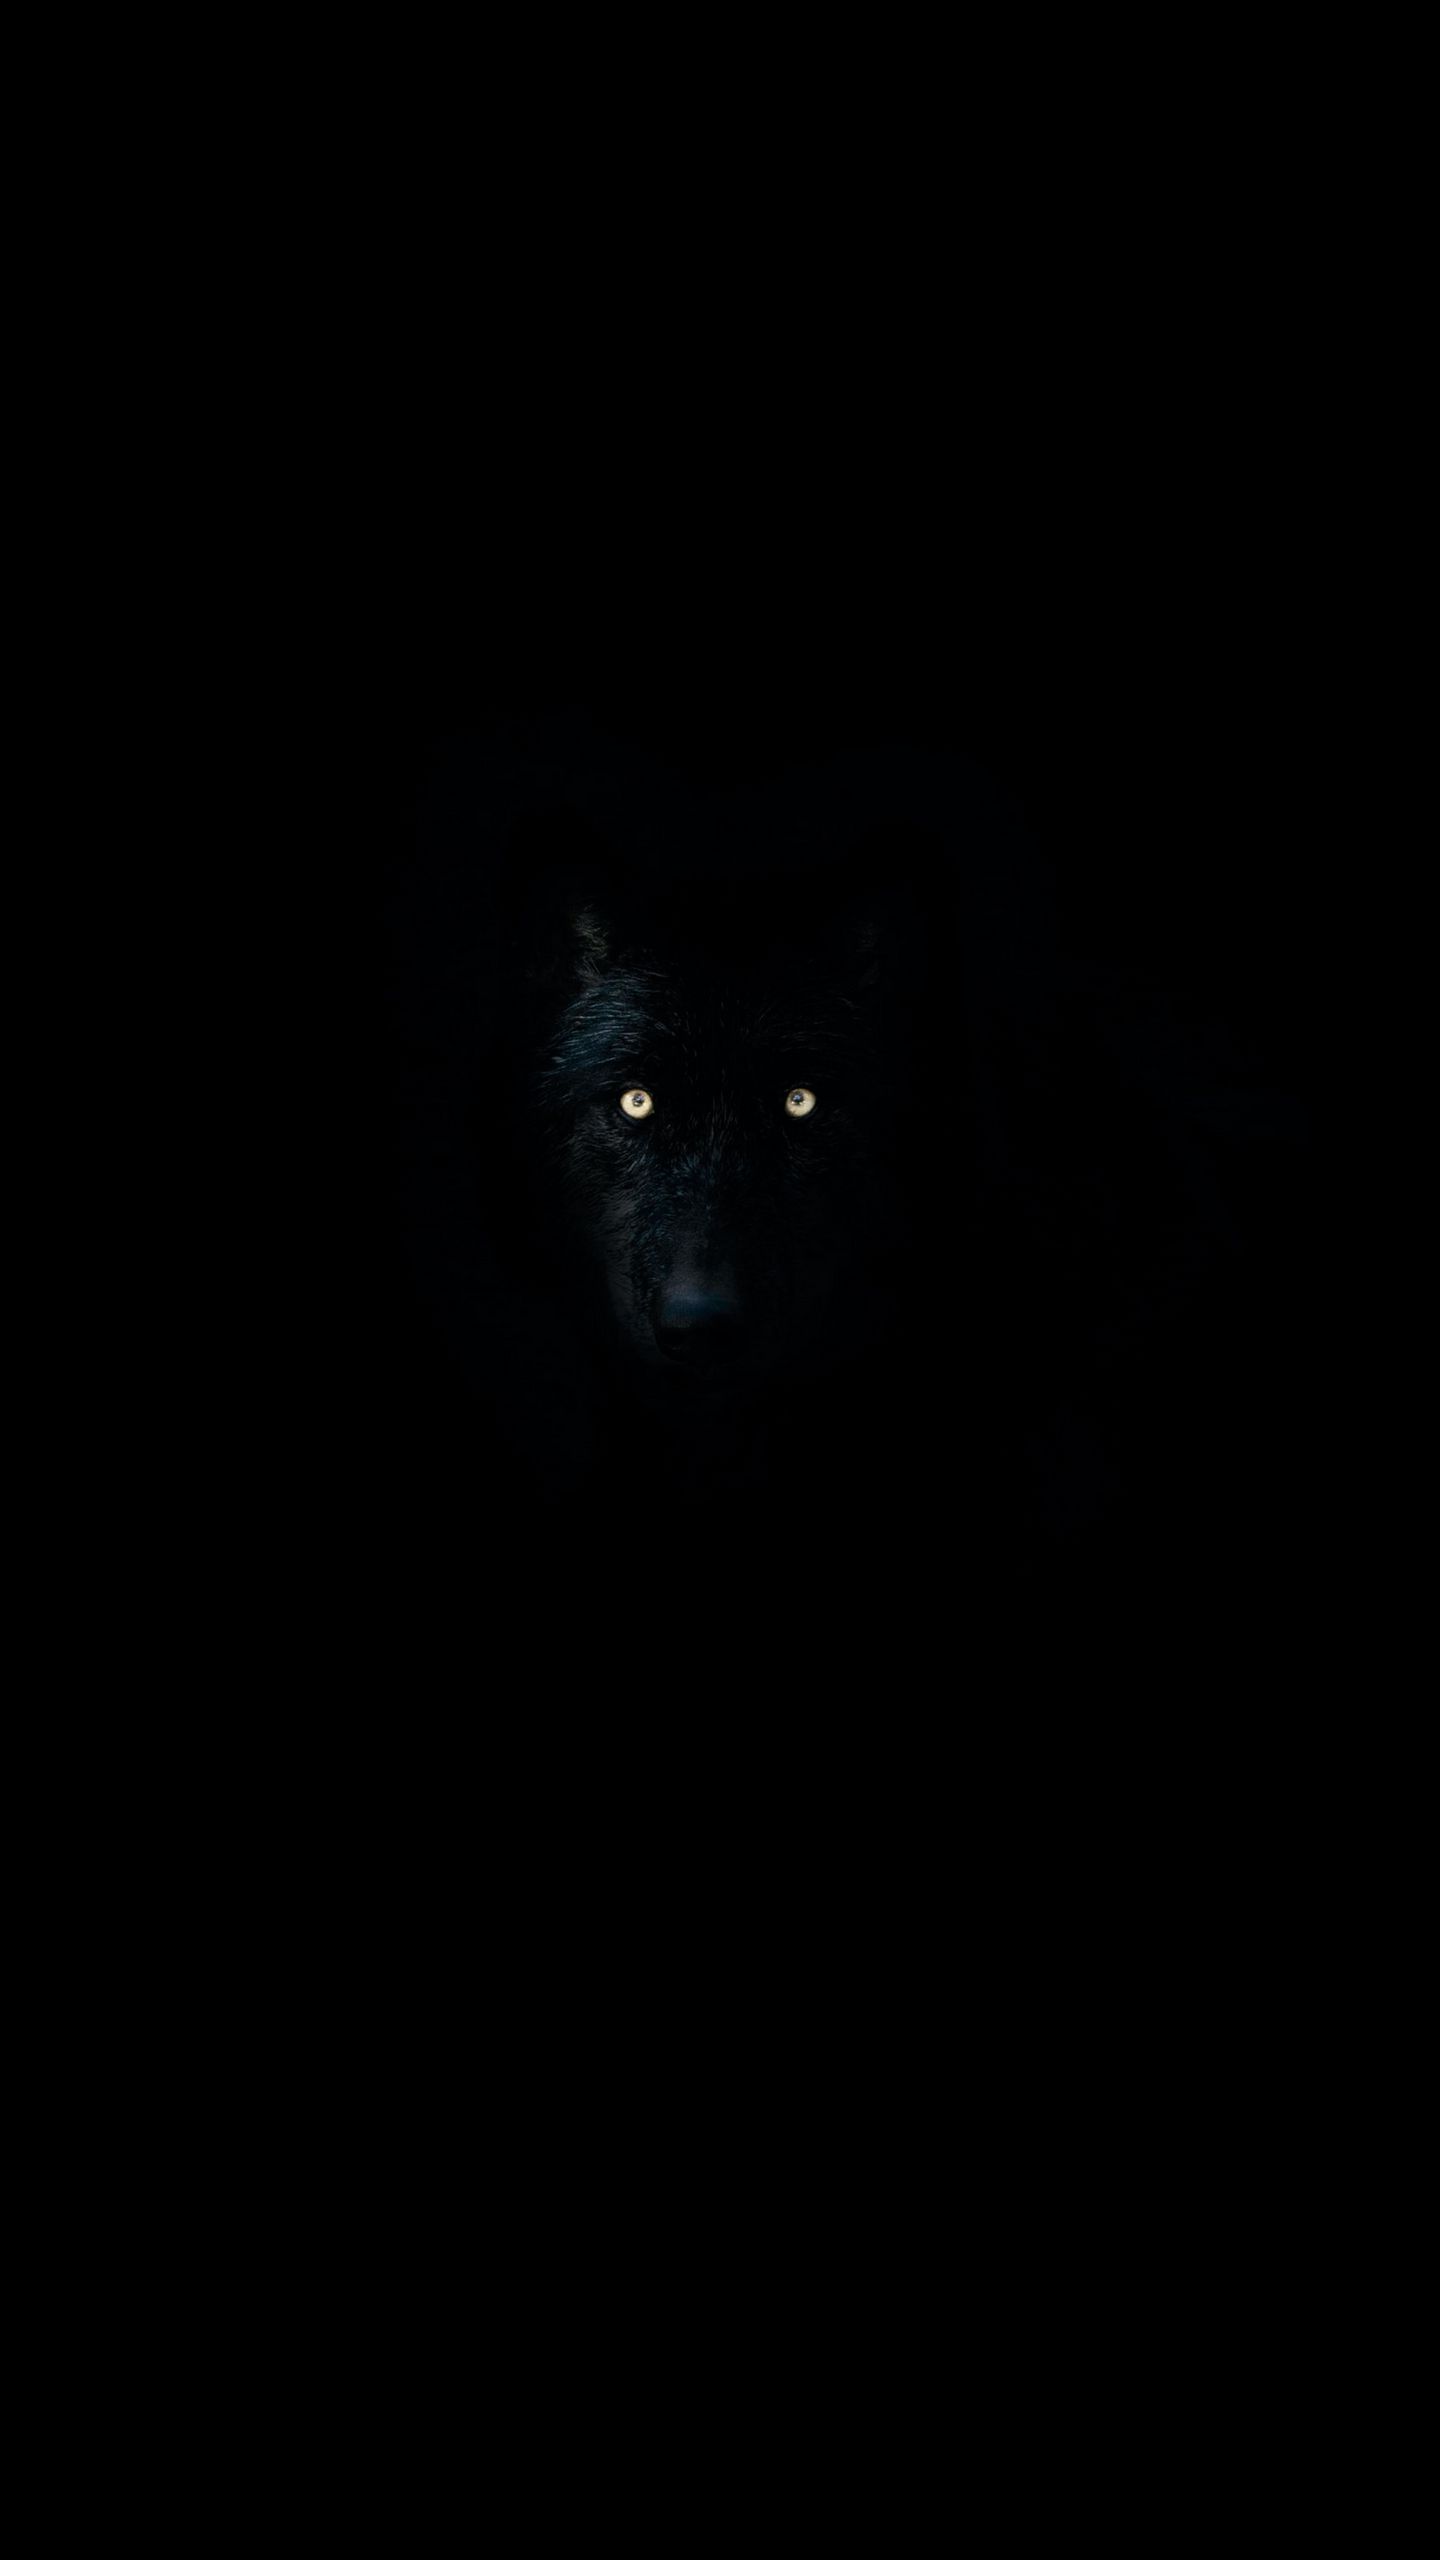 Wolf Eye Pictures  Download Free Images on Unsplash